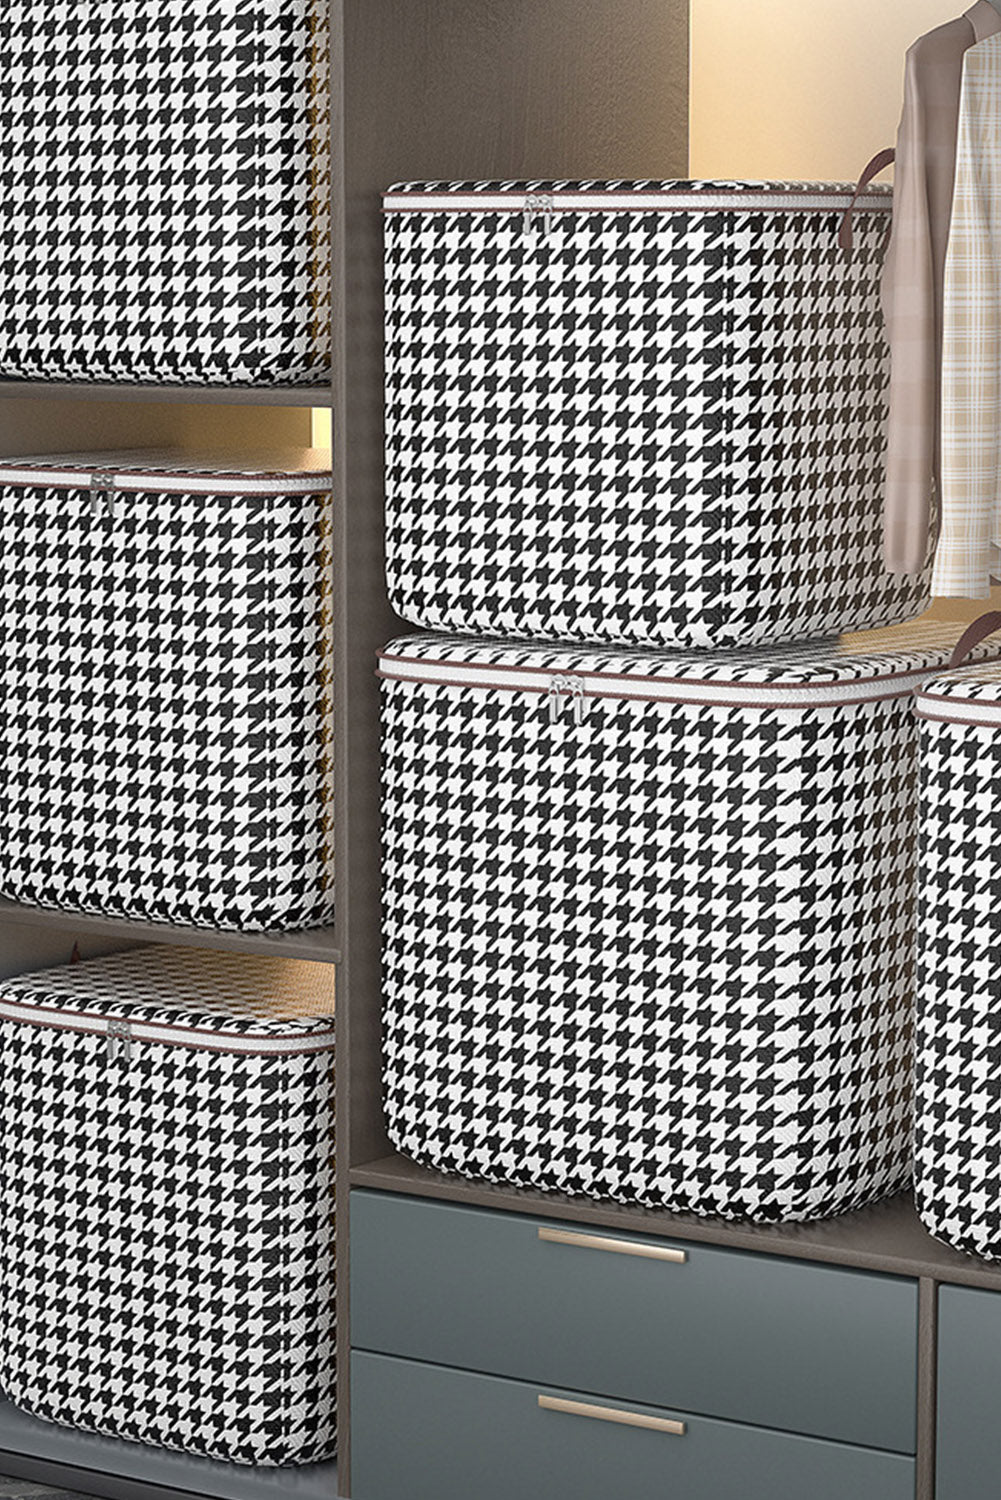 Houndstooth Storage Boxes